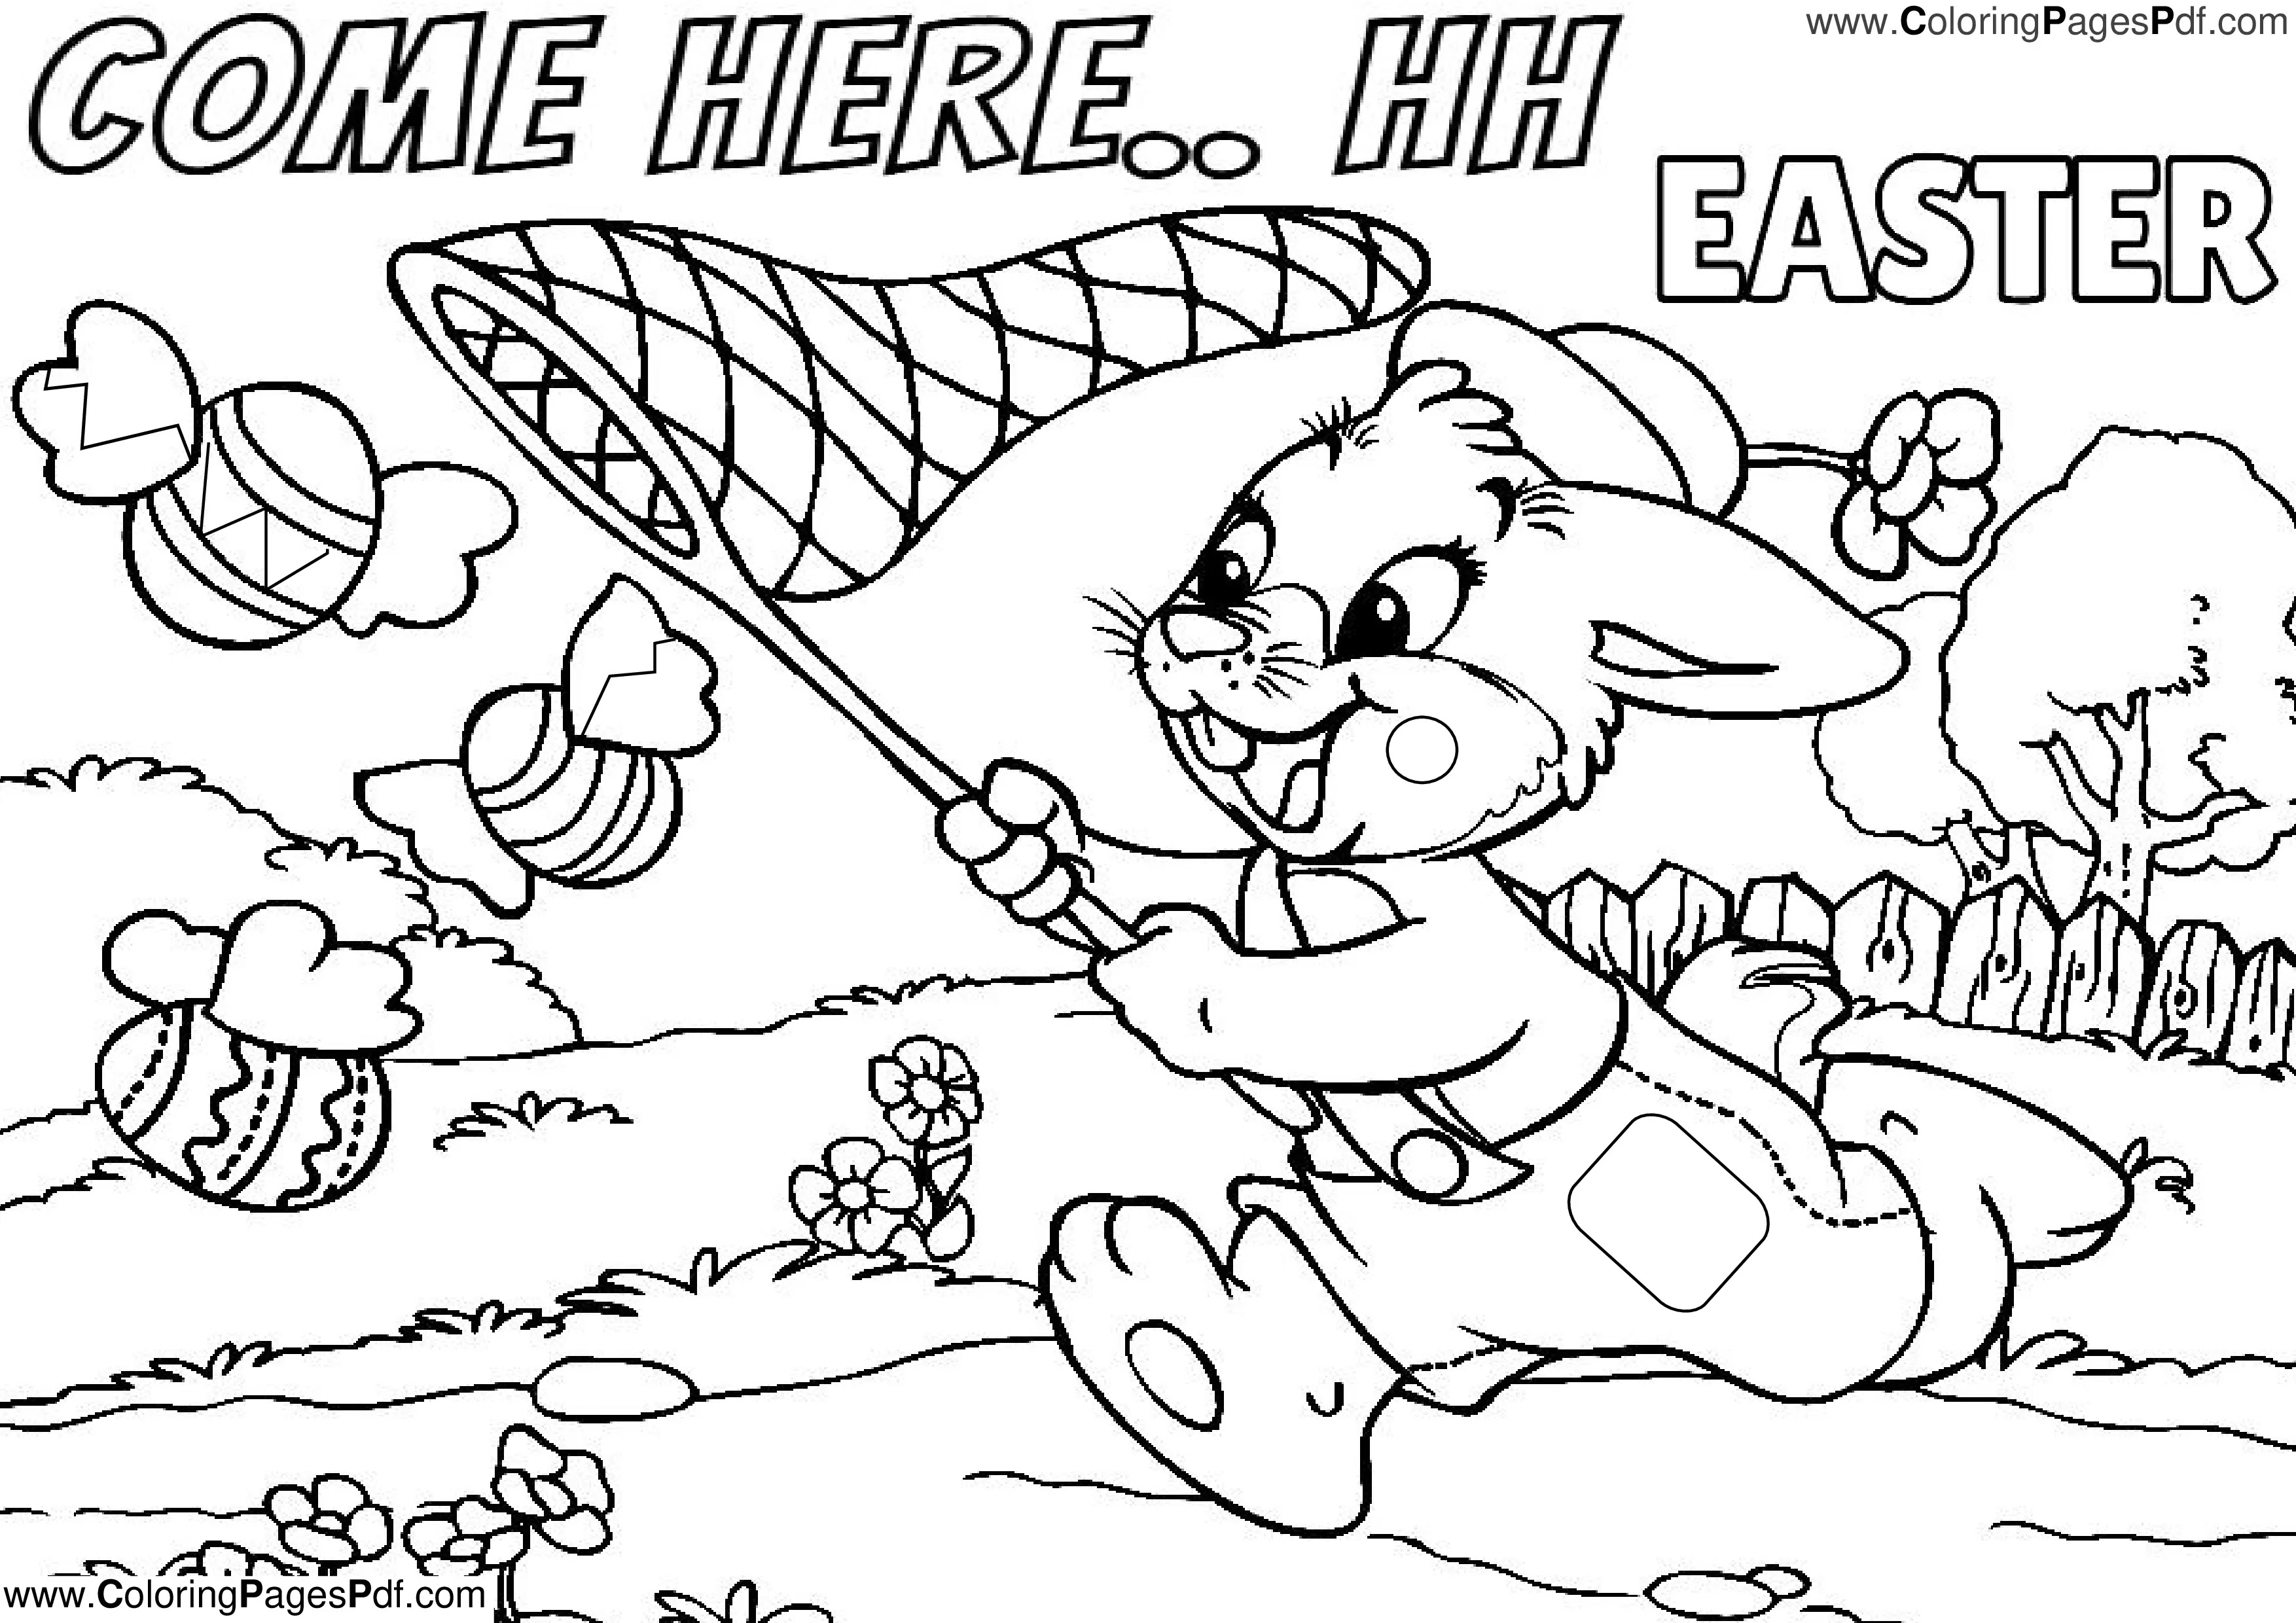 Easter bunny coloring pages for adults